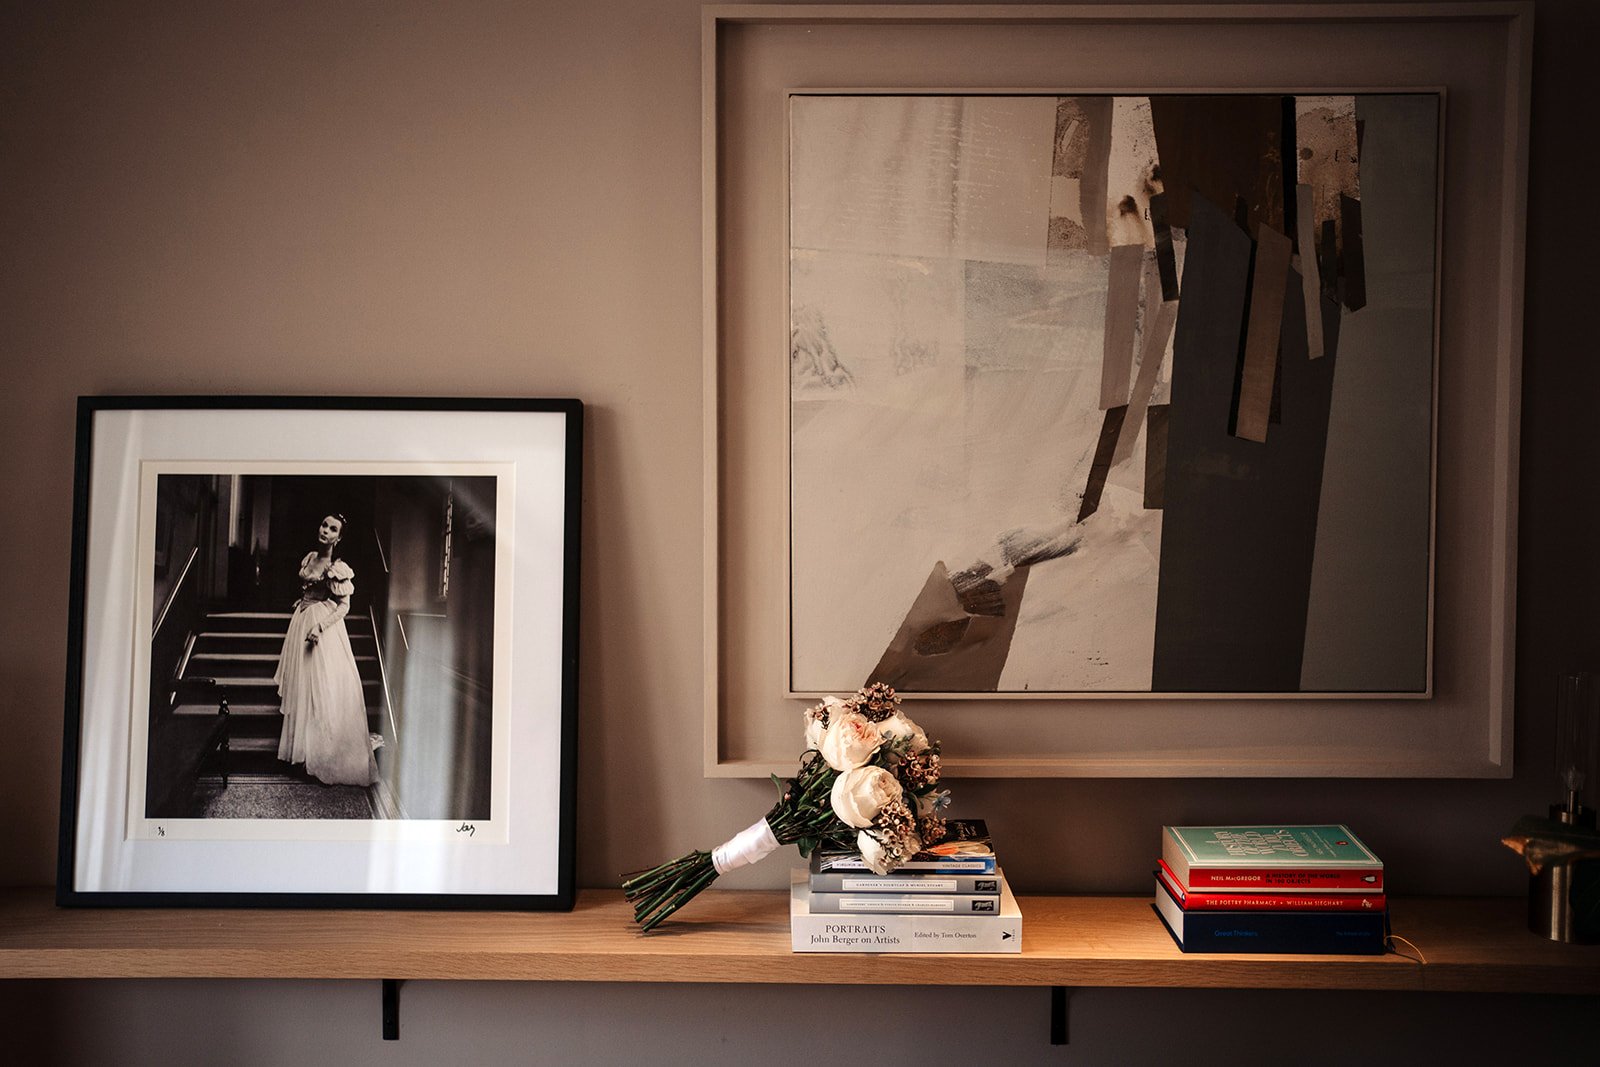 Intimate winter wedding at Heckfield Place